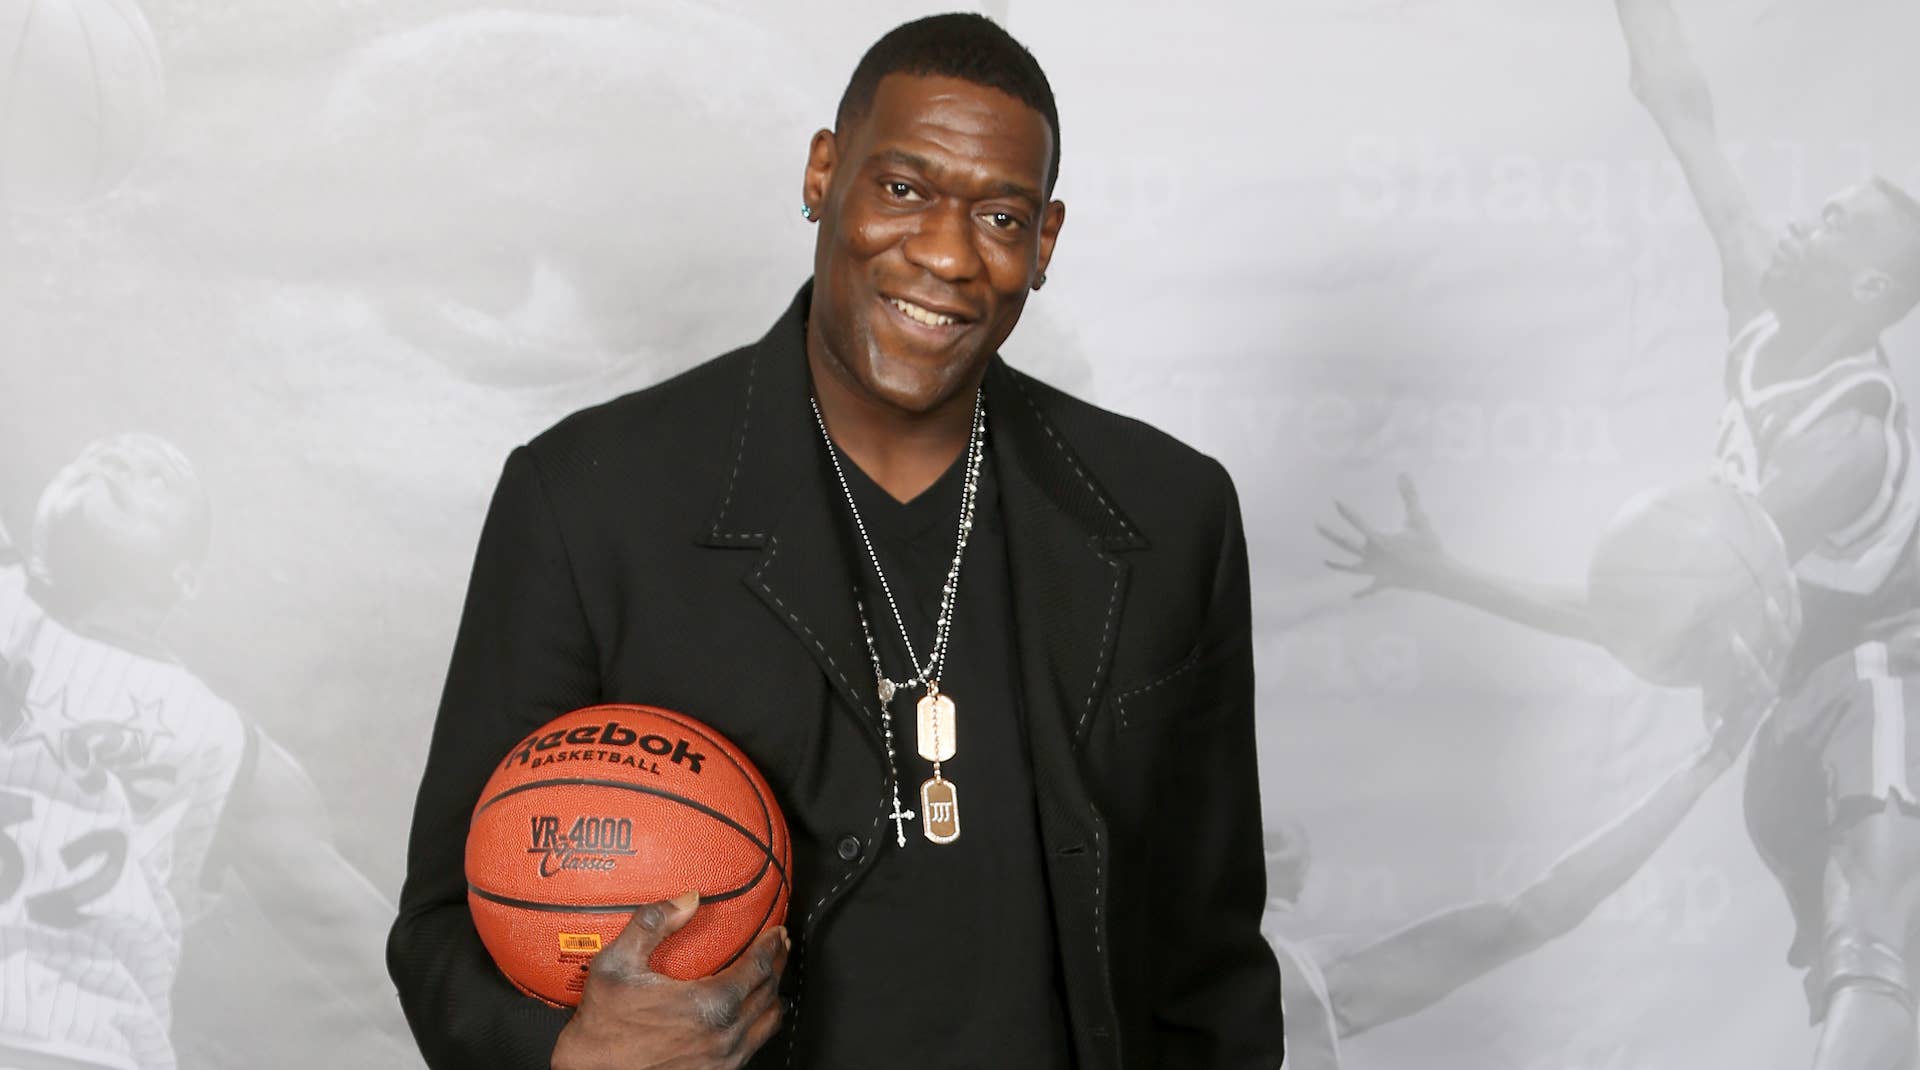 Shawn Kemp photo for news story